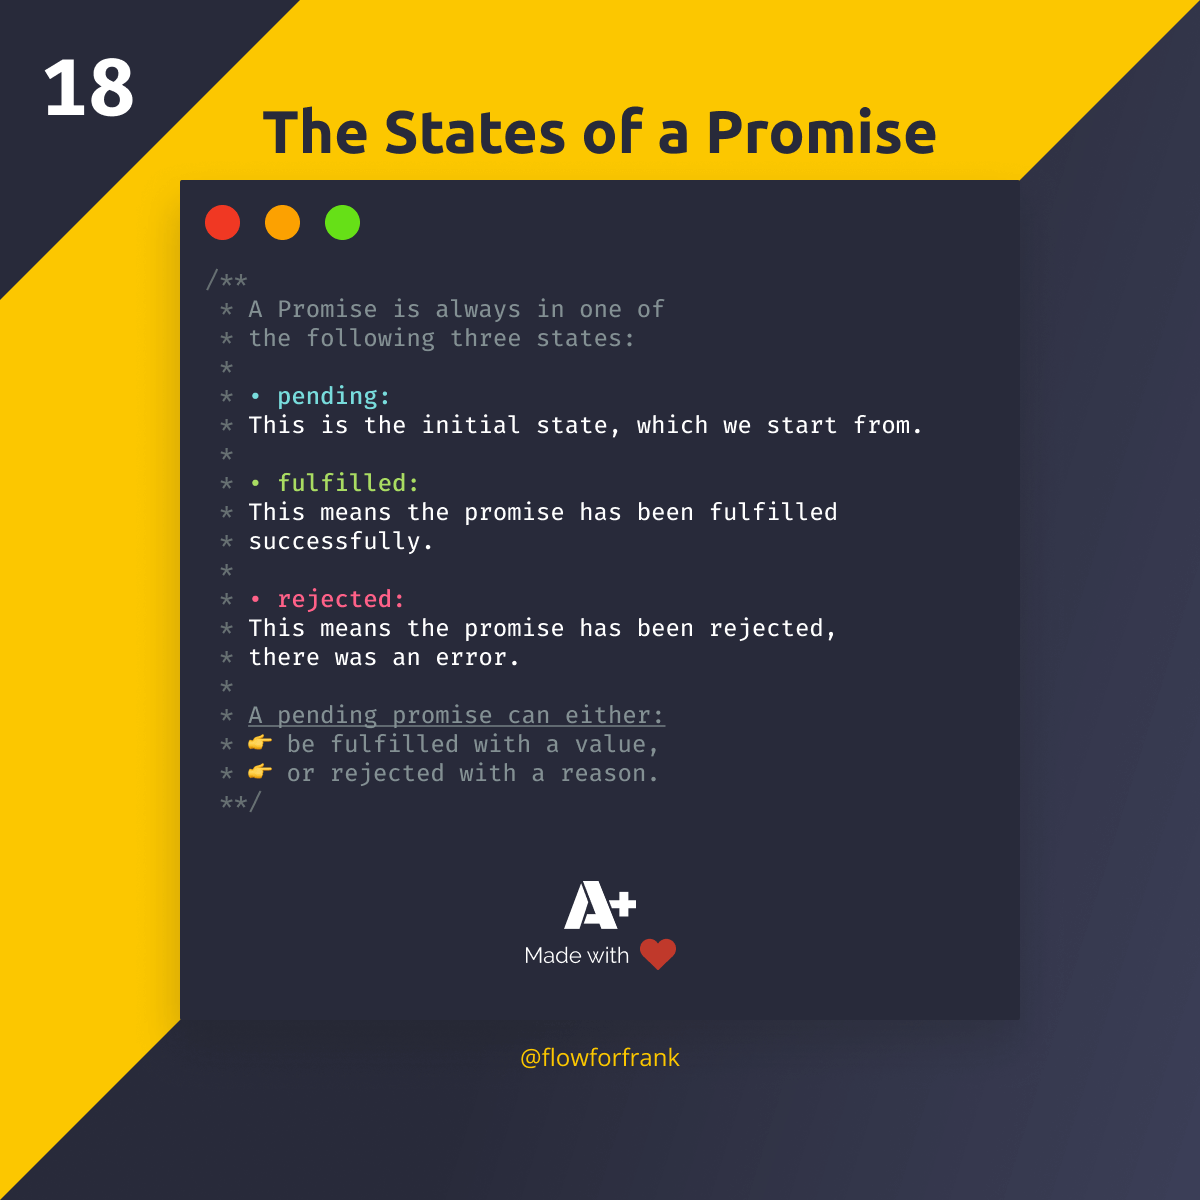 In Which State Can a Promise Be?